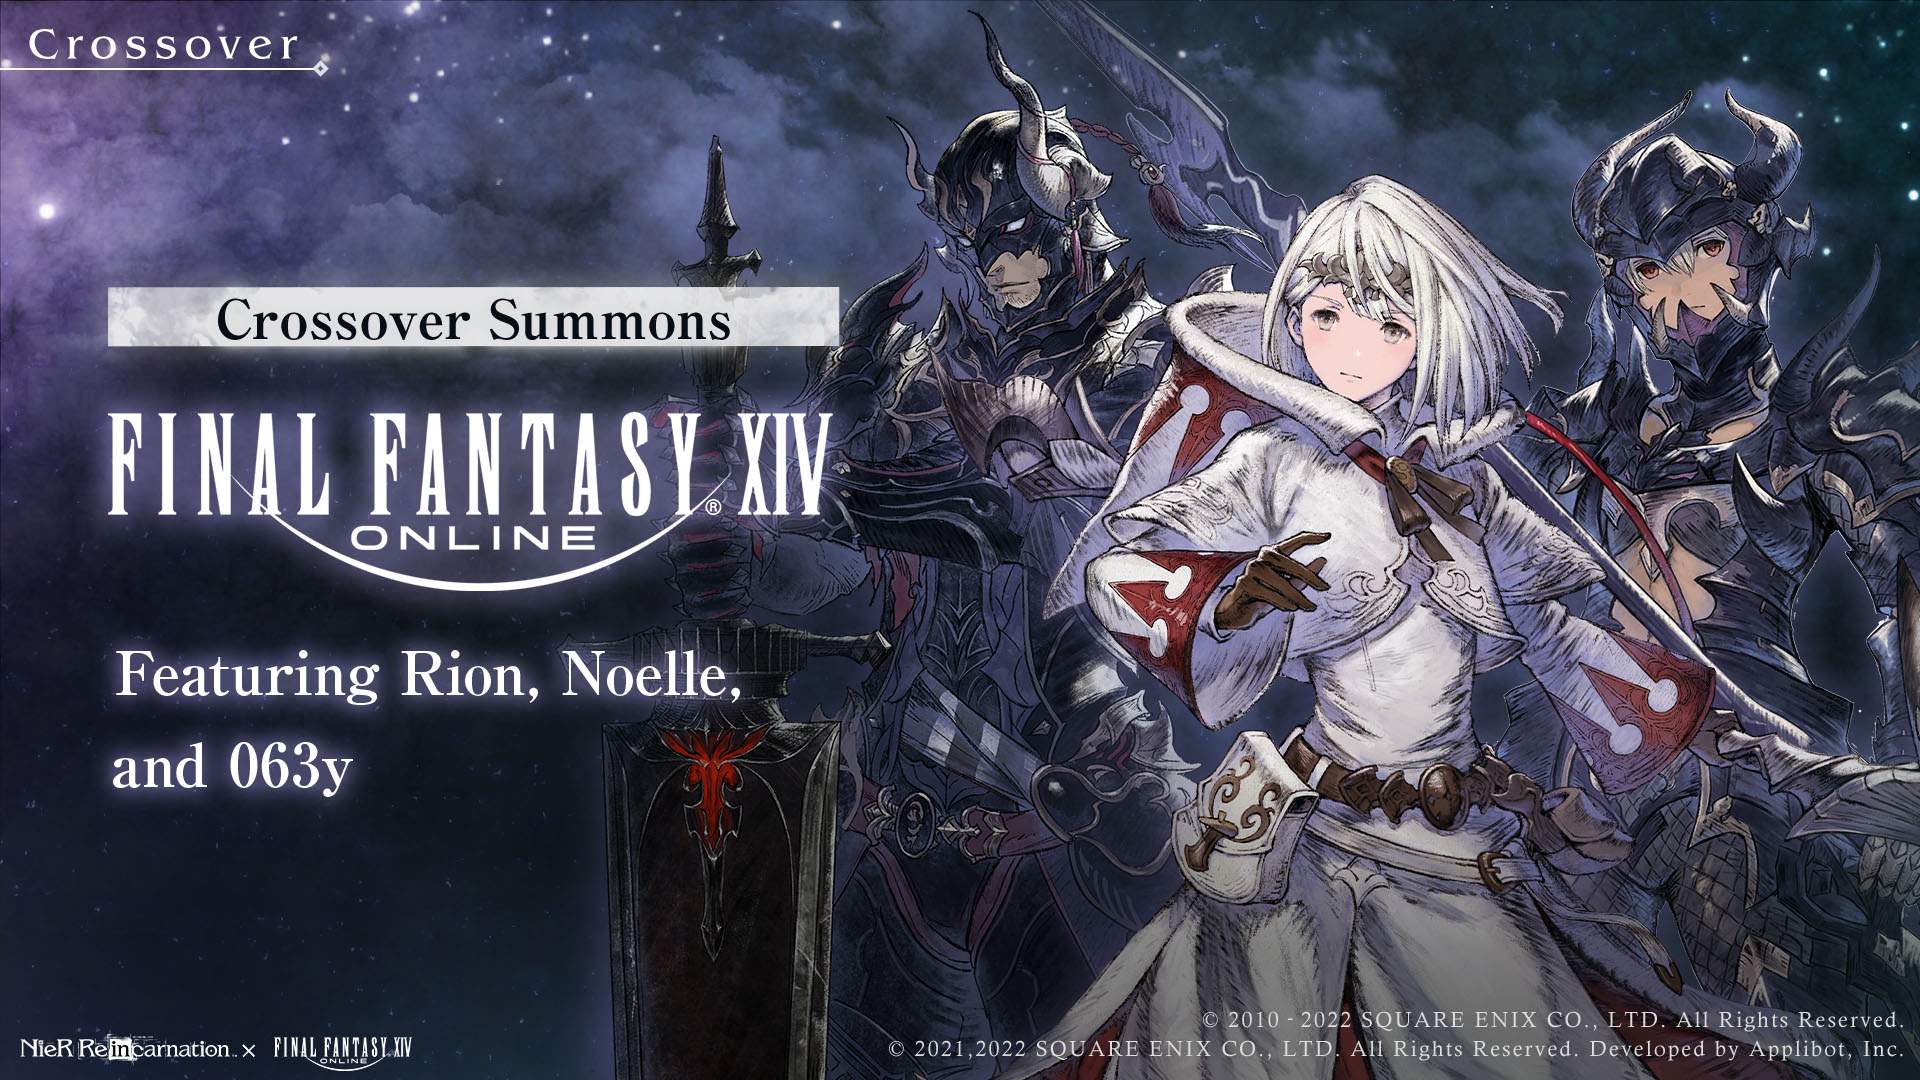 Rion, Noelle, and 063y featured in FFXIV themed costumes for the crossover event